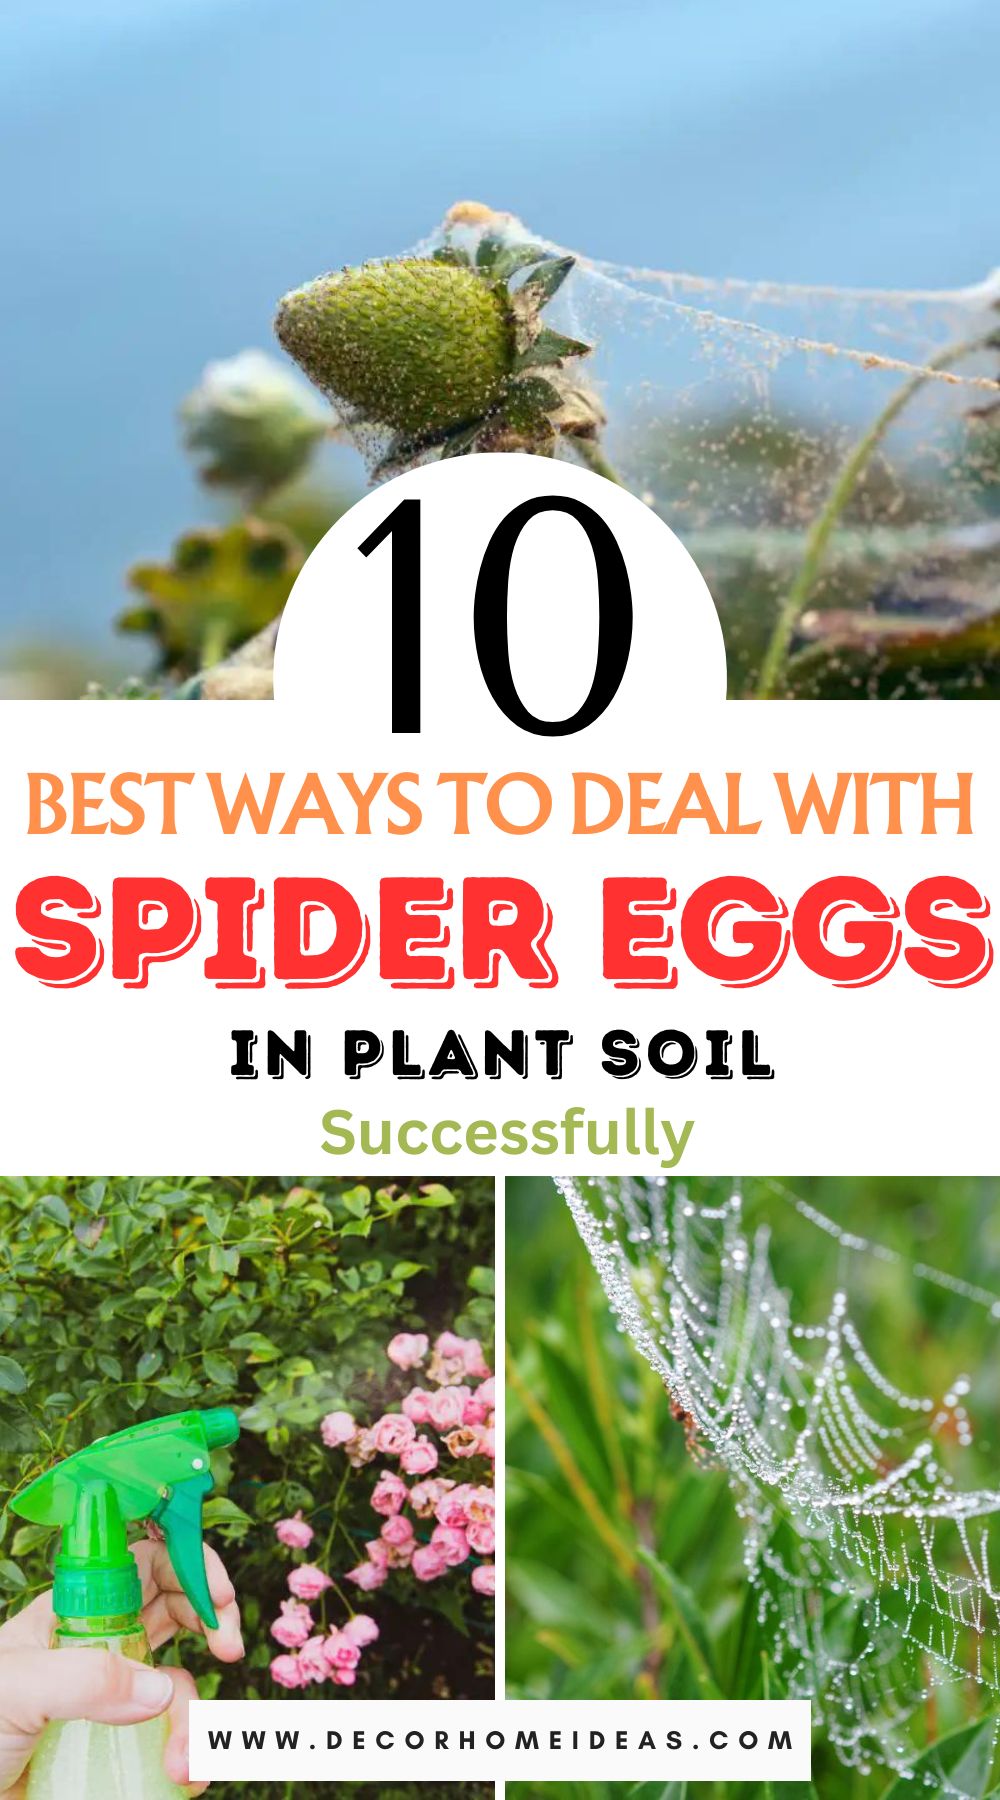 Tackle the challenge of spider eggs in your plant soil with our expert-approved guide featuring 10 successful methods. Click to explore effective techniques and ensure your plants thrive pest-free!